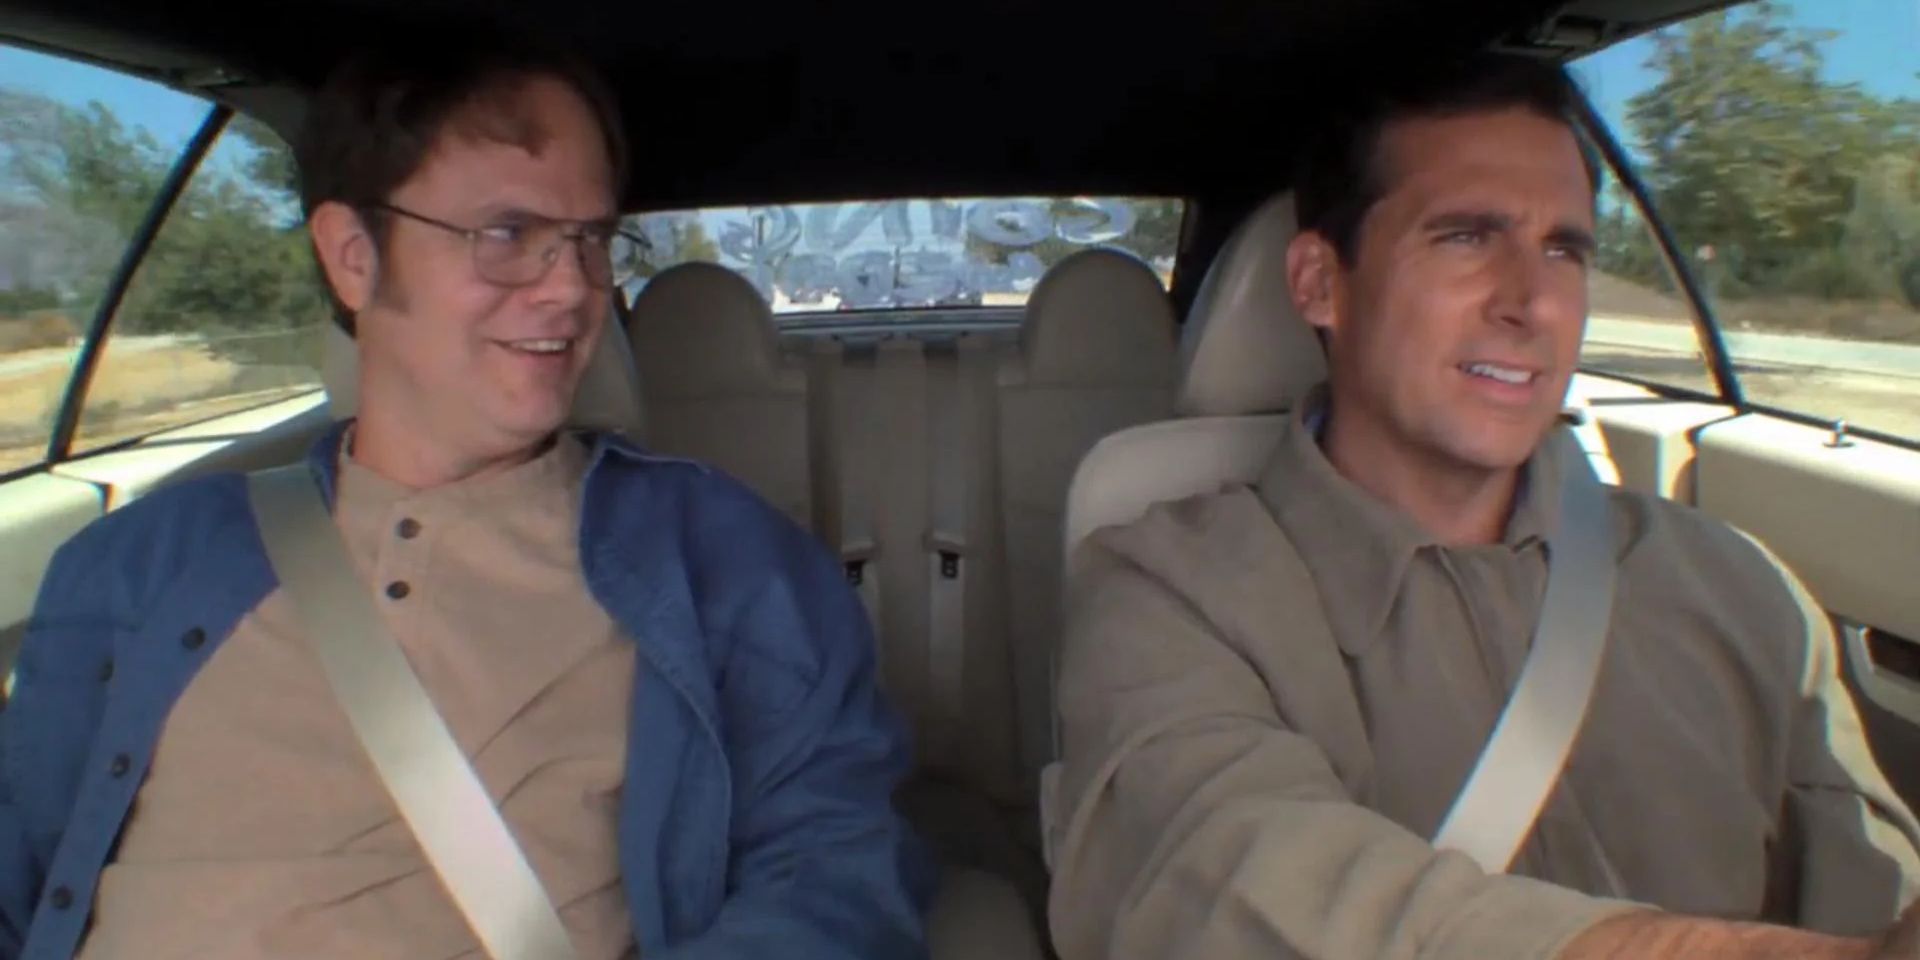 Michael &amp; Dwight ride in a car in The Office.